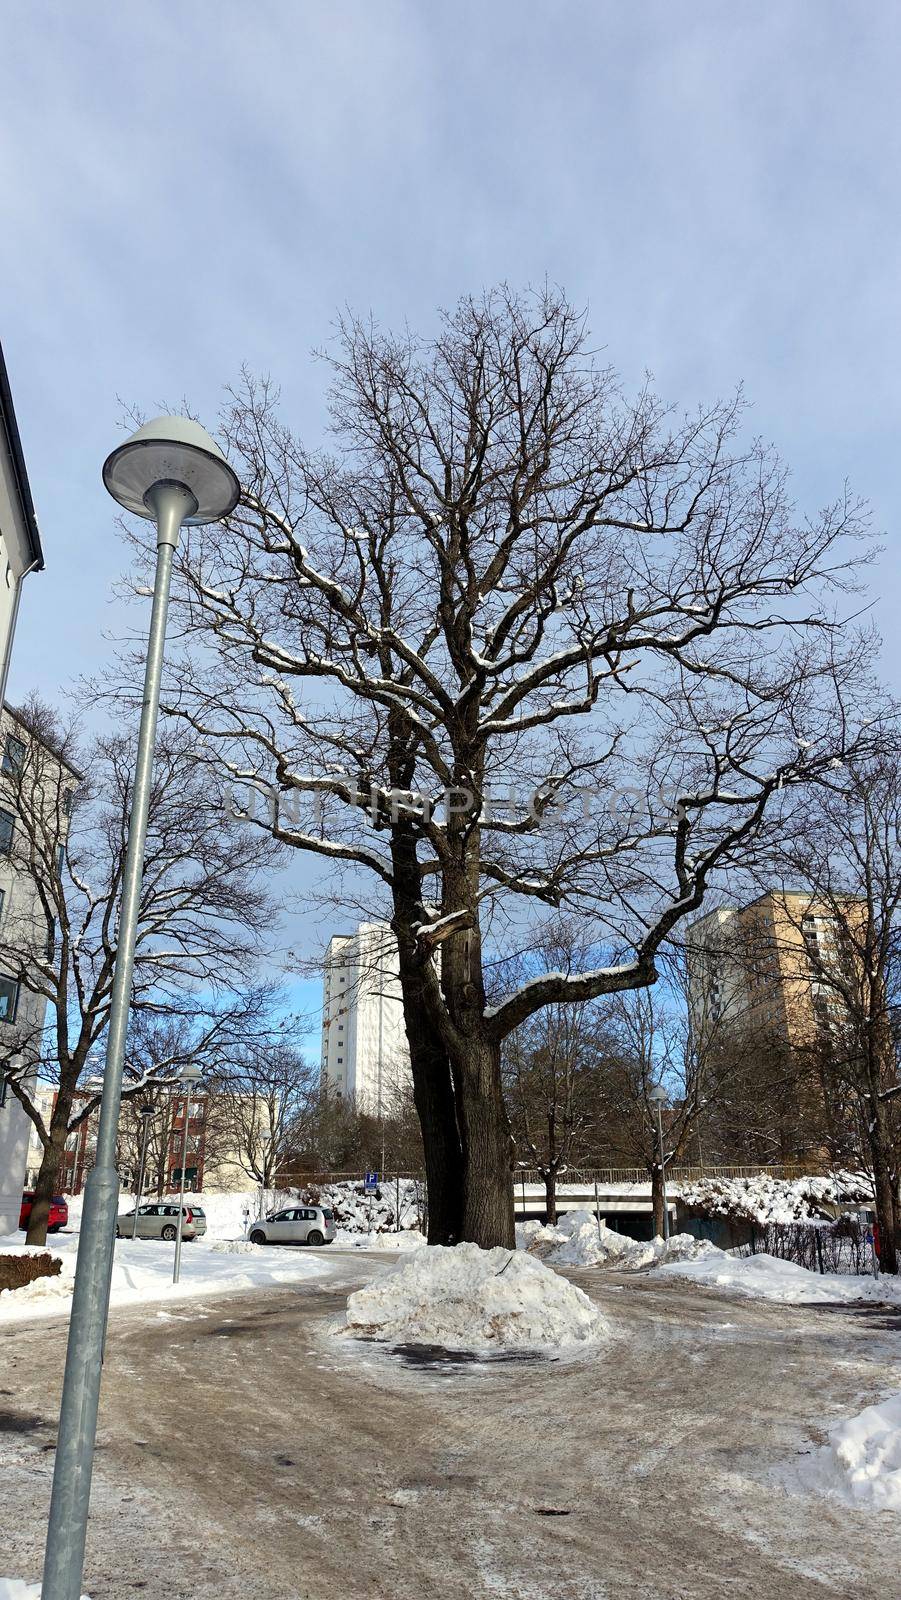 A huge oak tree in the urban center on the outskirts of Stockholm in Sweden